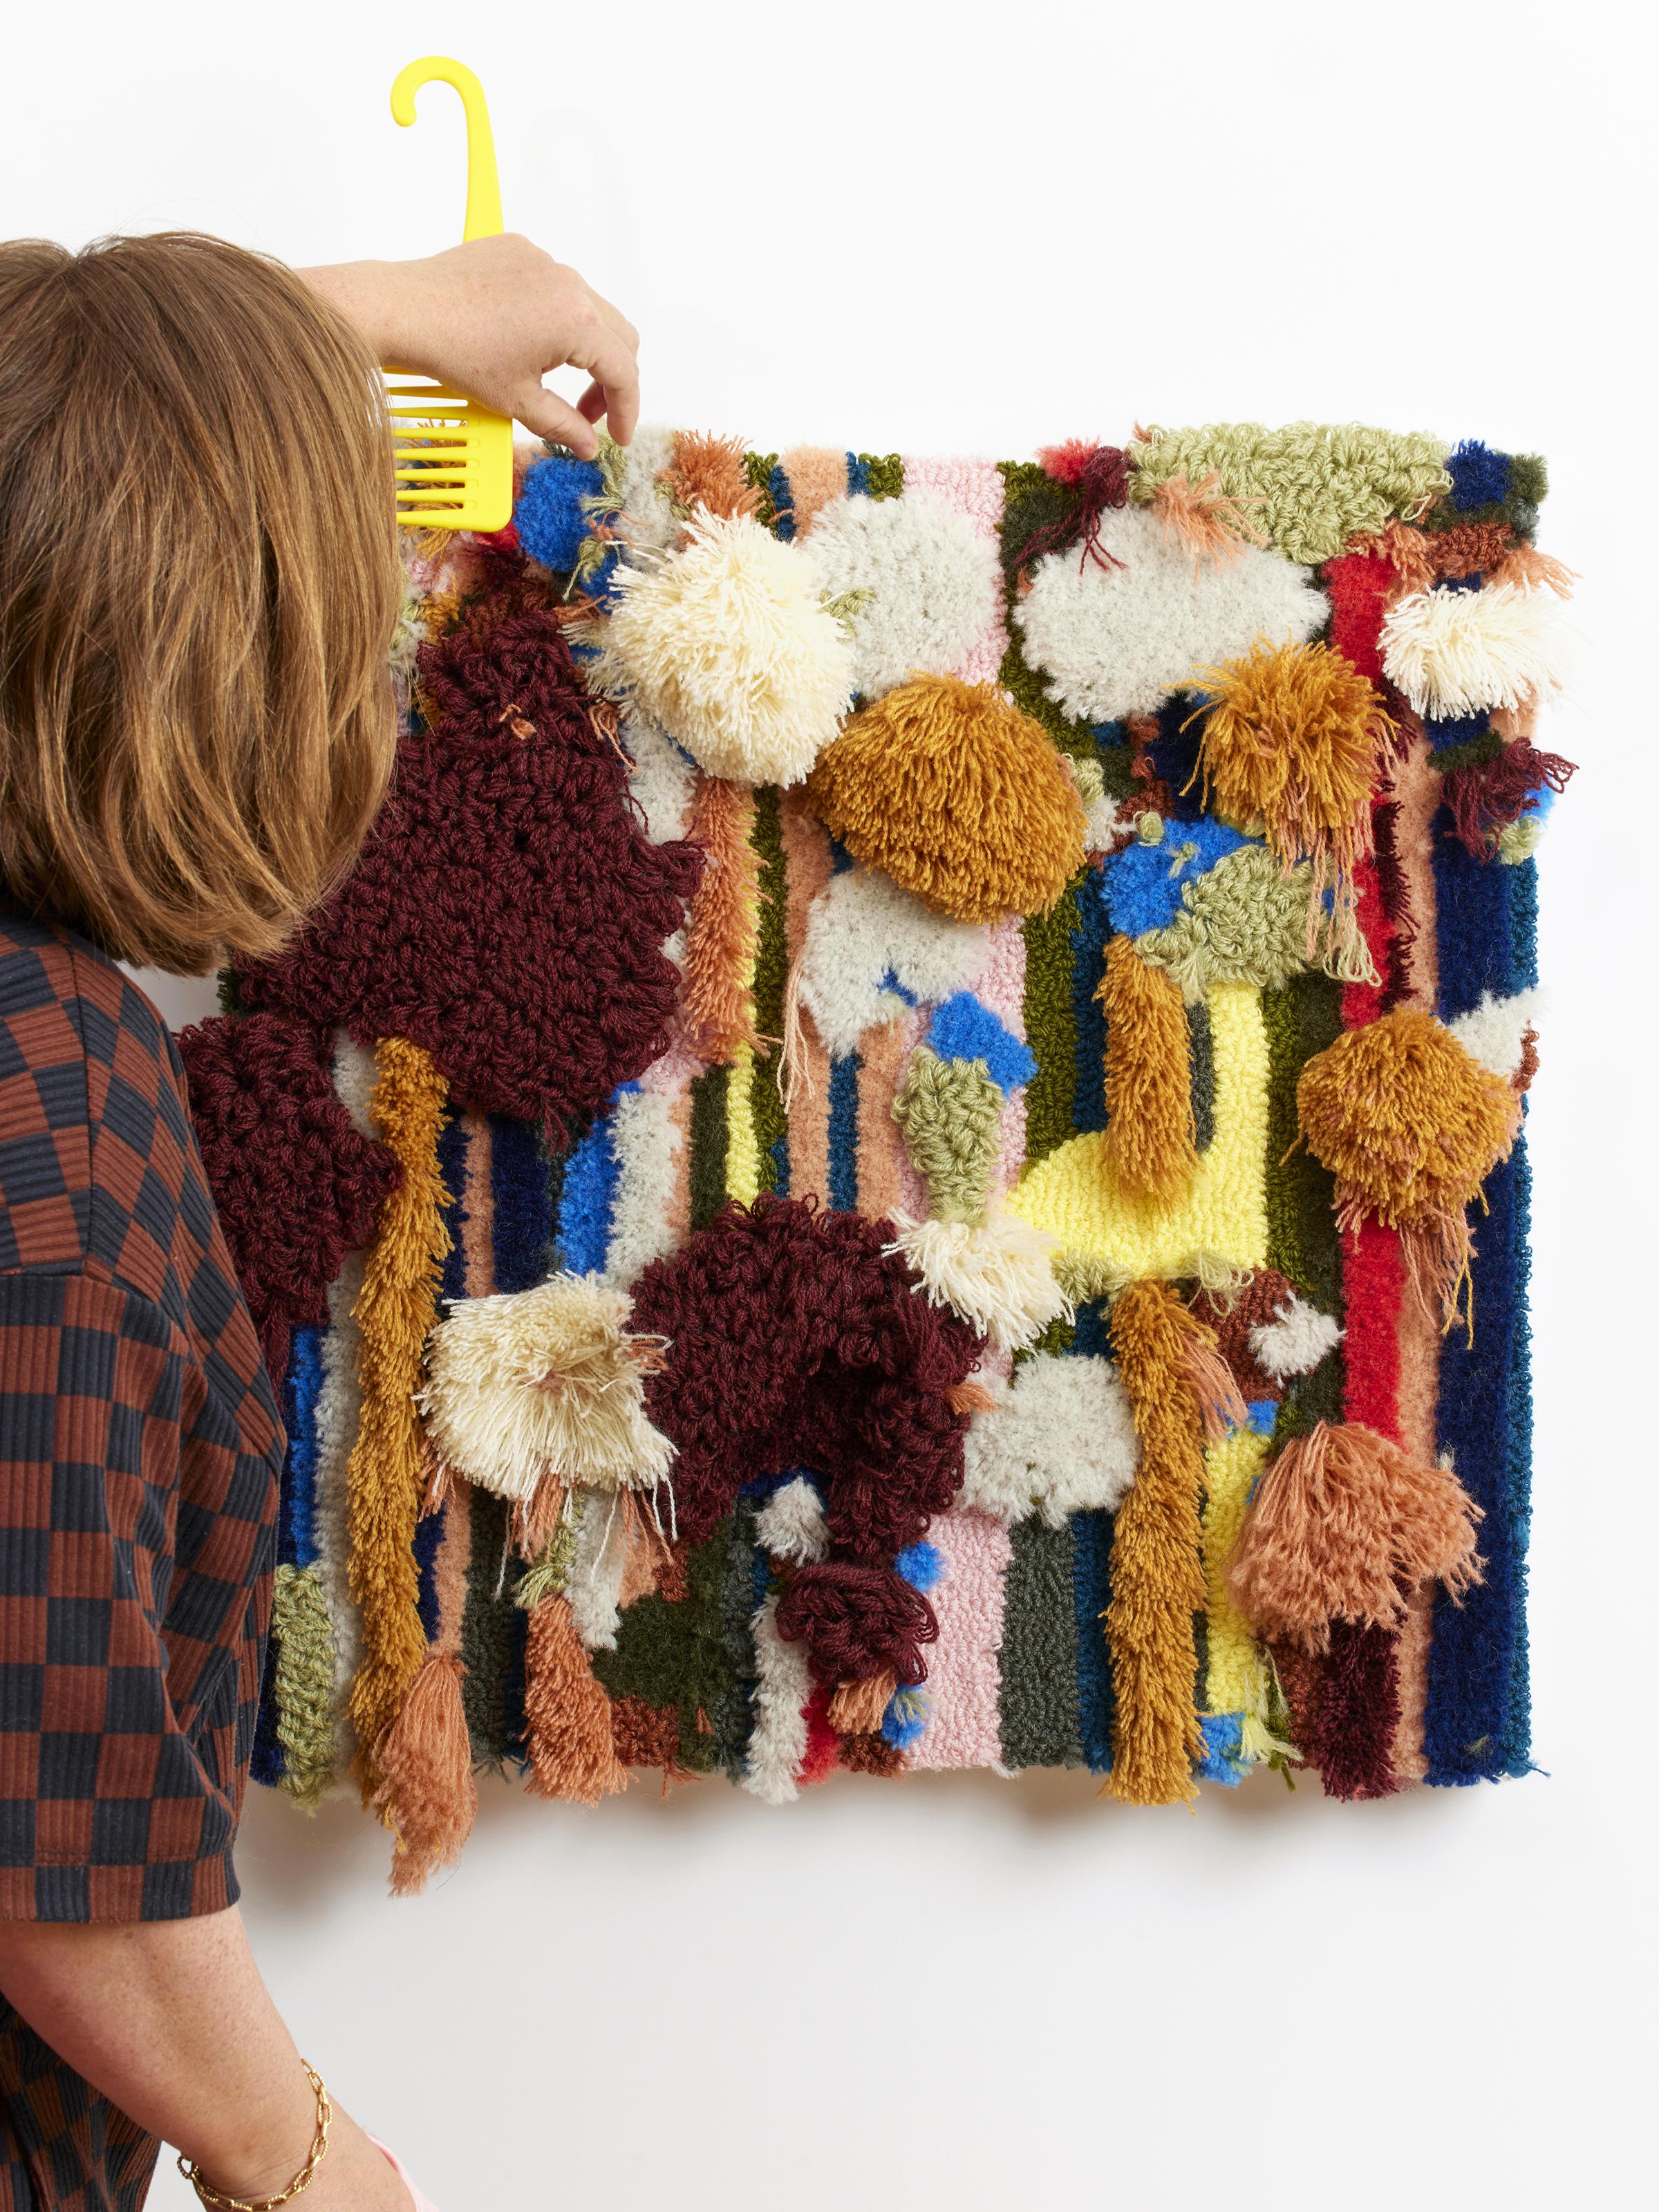 'A Tisket, A Tasket' - contemporary fiber art, textural, colorful, tufting - Sculpture by Trish Andersen